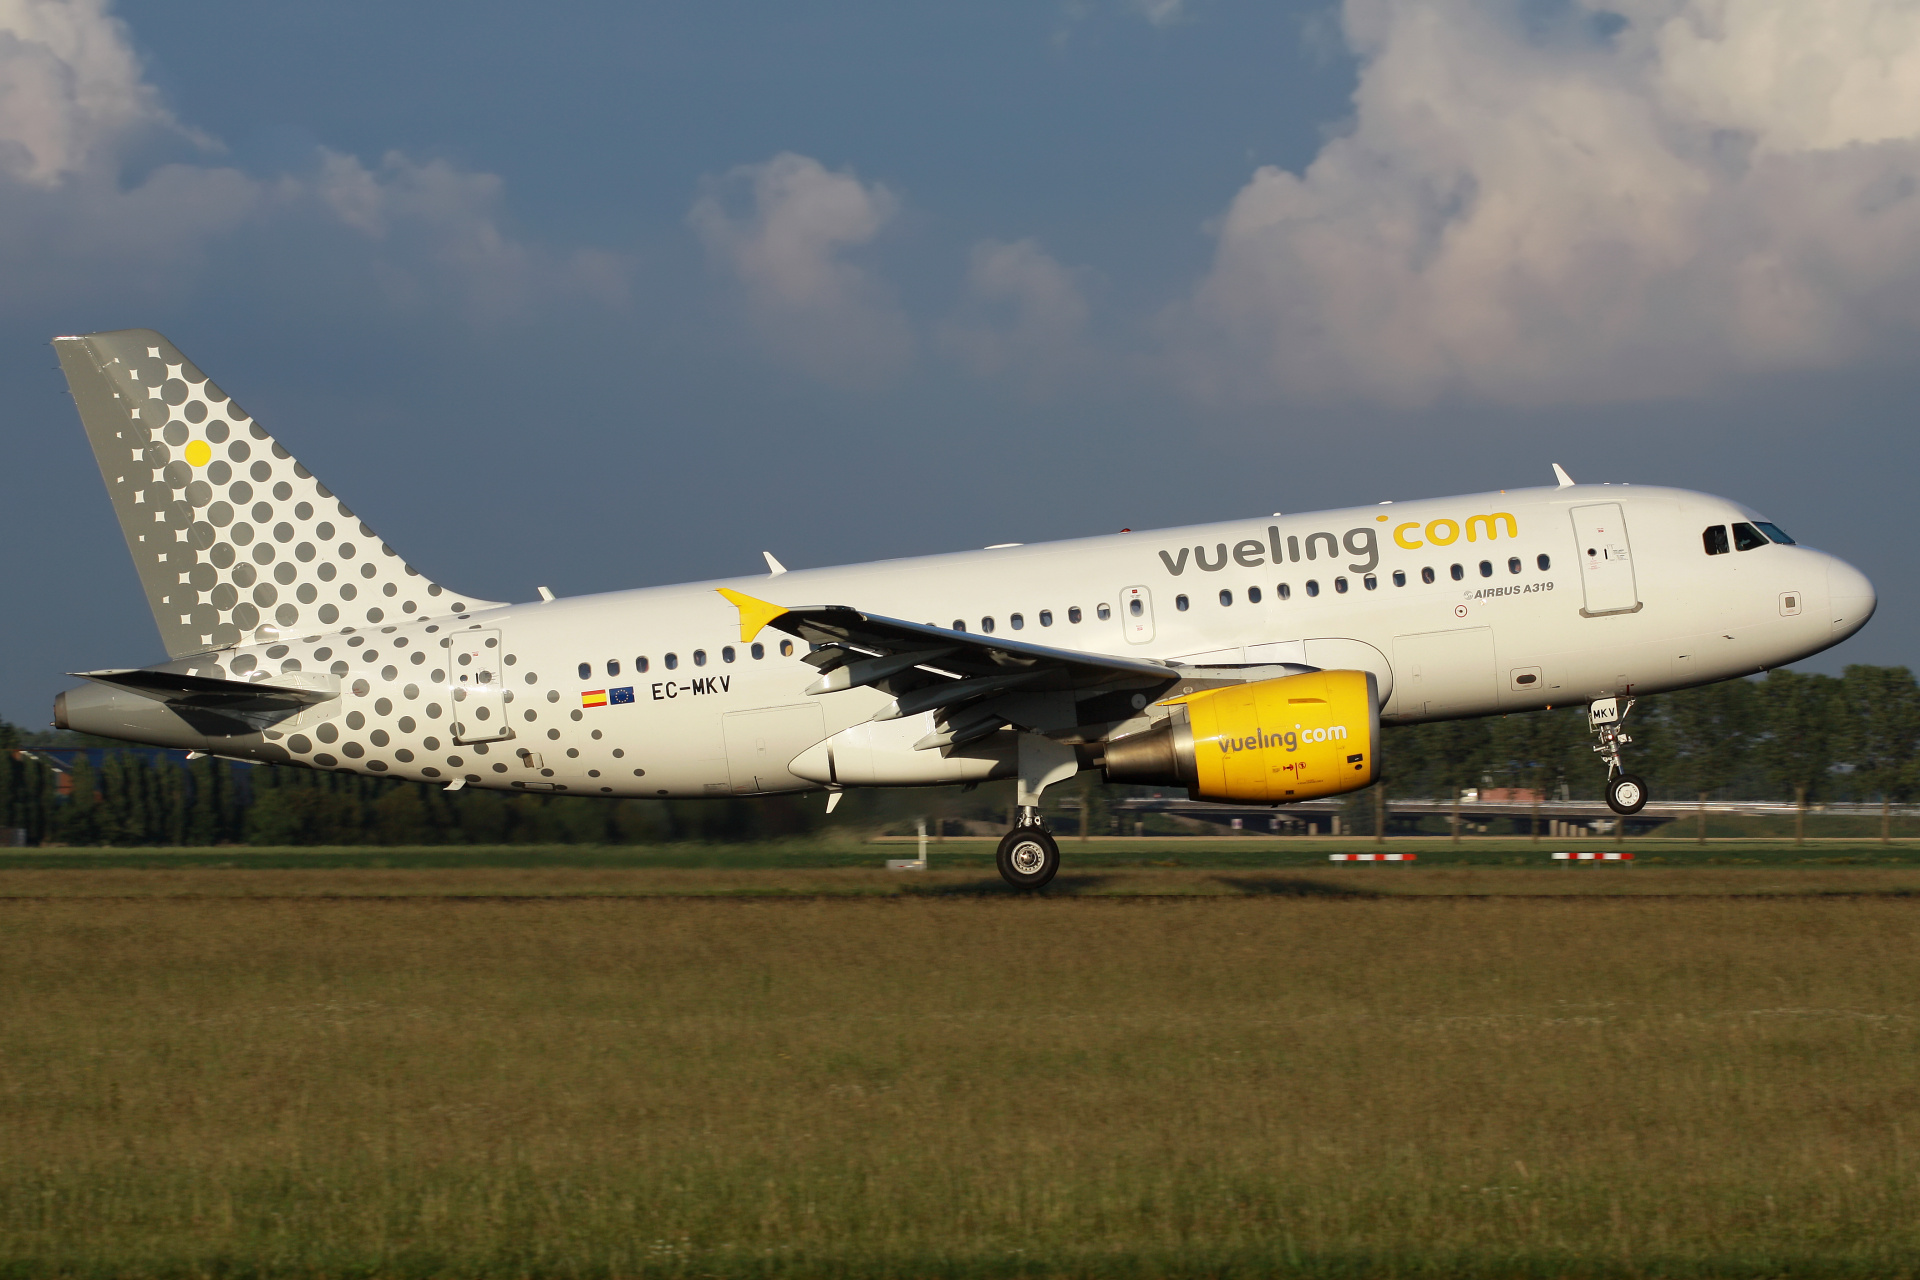 EC-MKV, Vueling Airlines (Aircraft » Schiphol Spotting » Airbus A319-100)